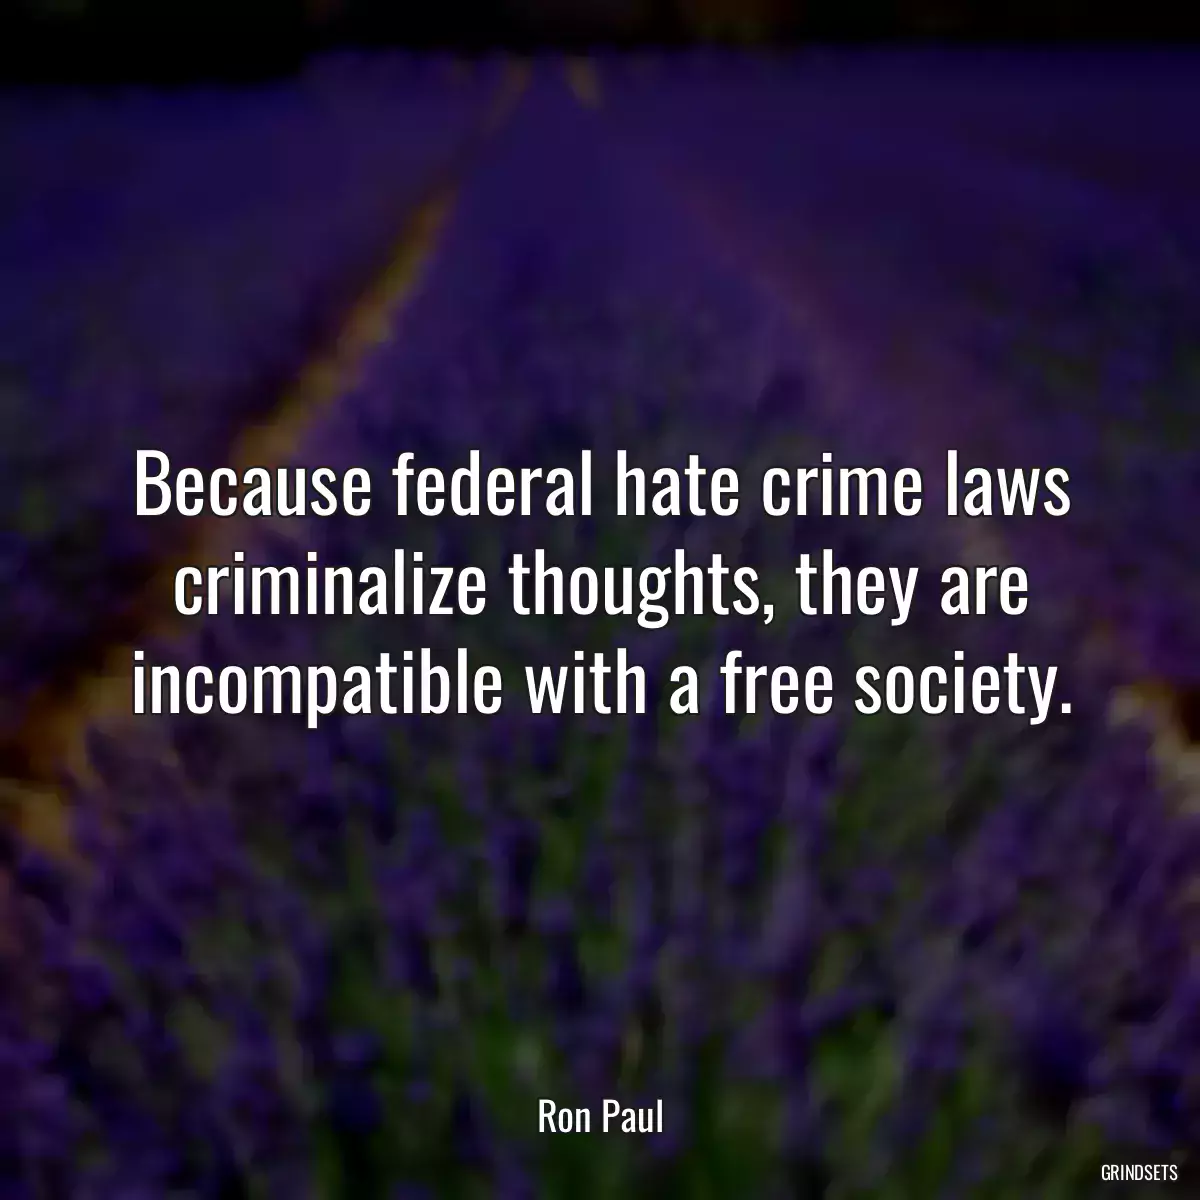 Because federal hate crime laws criminalize thoughts, they are incompatible with a free society.